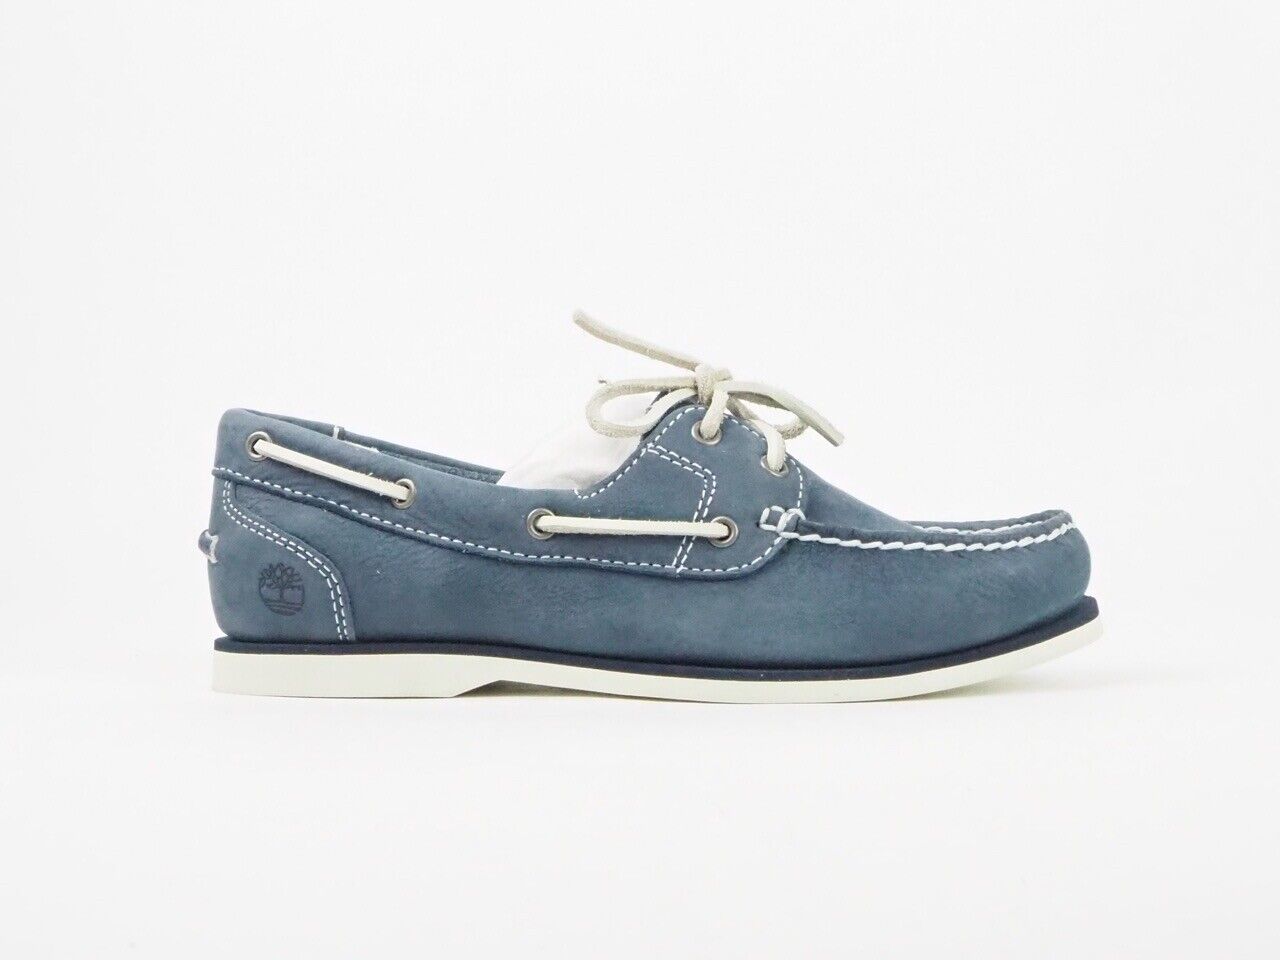 Mens Timberland Classic 2 Eye A3398 Med Blue Leather Slip On Boat Shoes